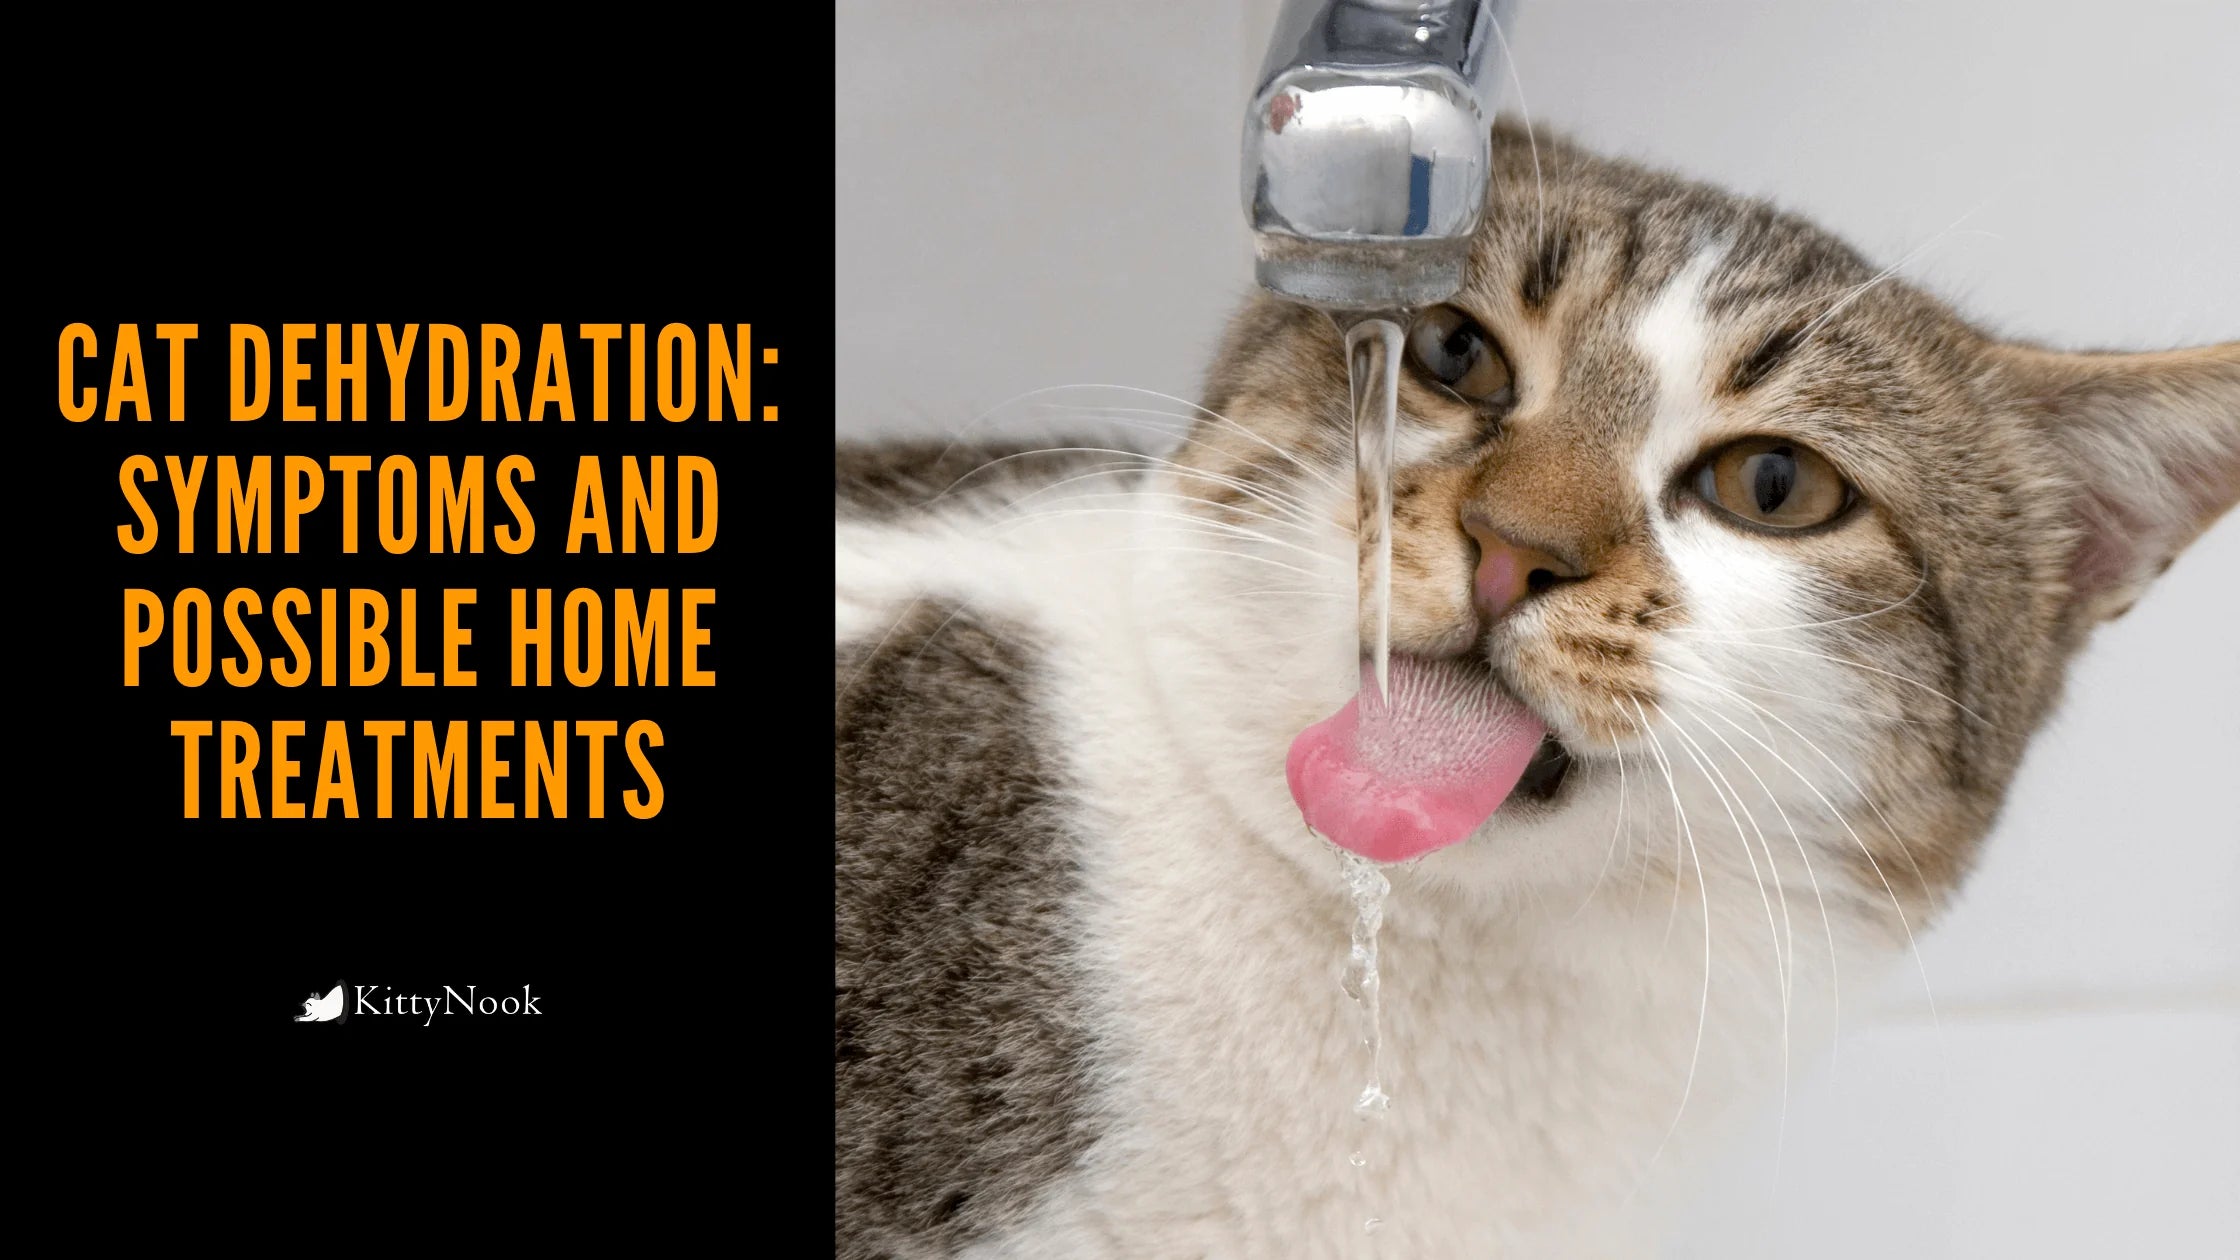 Cat Dehydration: Symptoms and Possible Home Treatments - KittyNook Cat Company